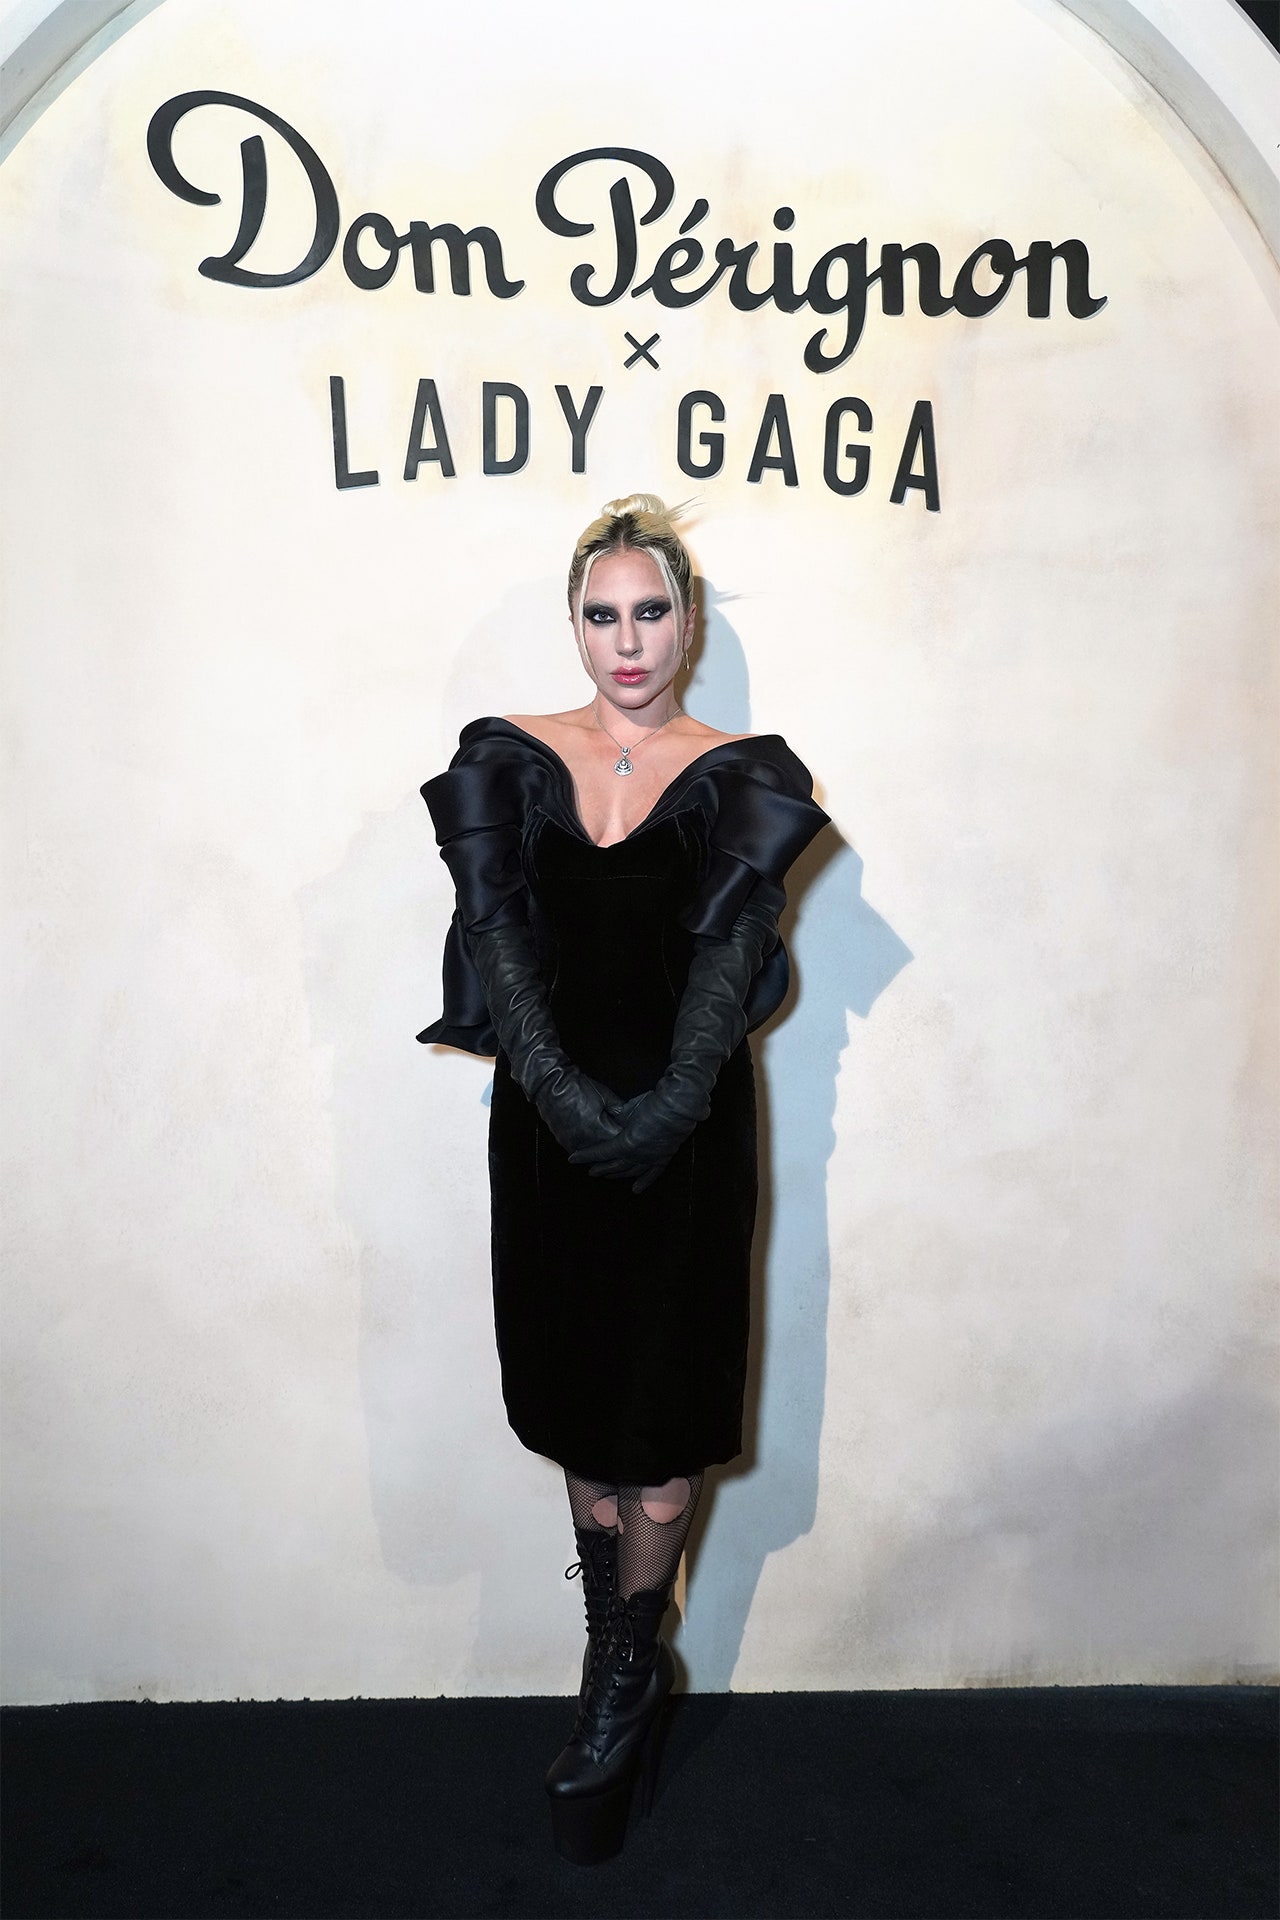 what-happened-when-i-flew-to-la-to-party-with-lady-gaga:-inside-one tatler-editor’s-hollywood-saga